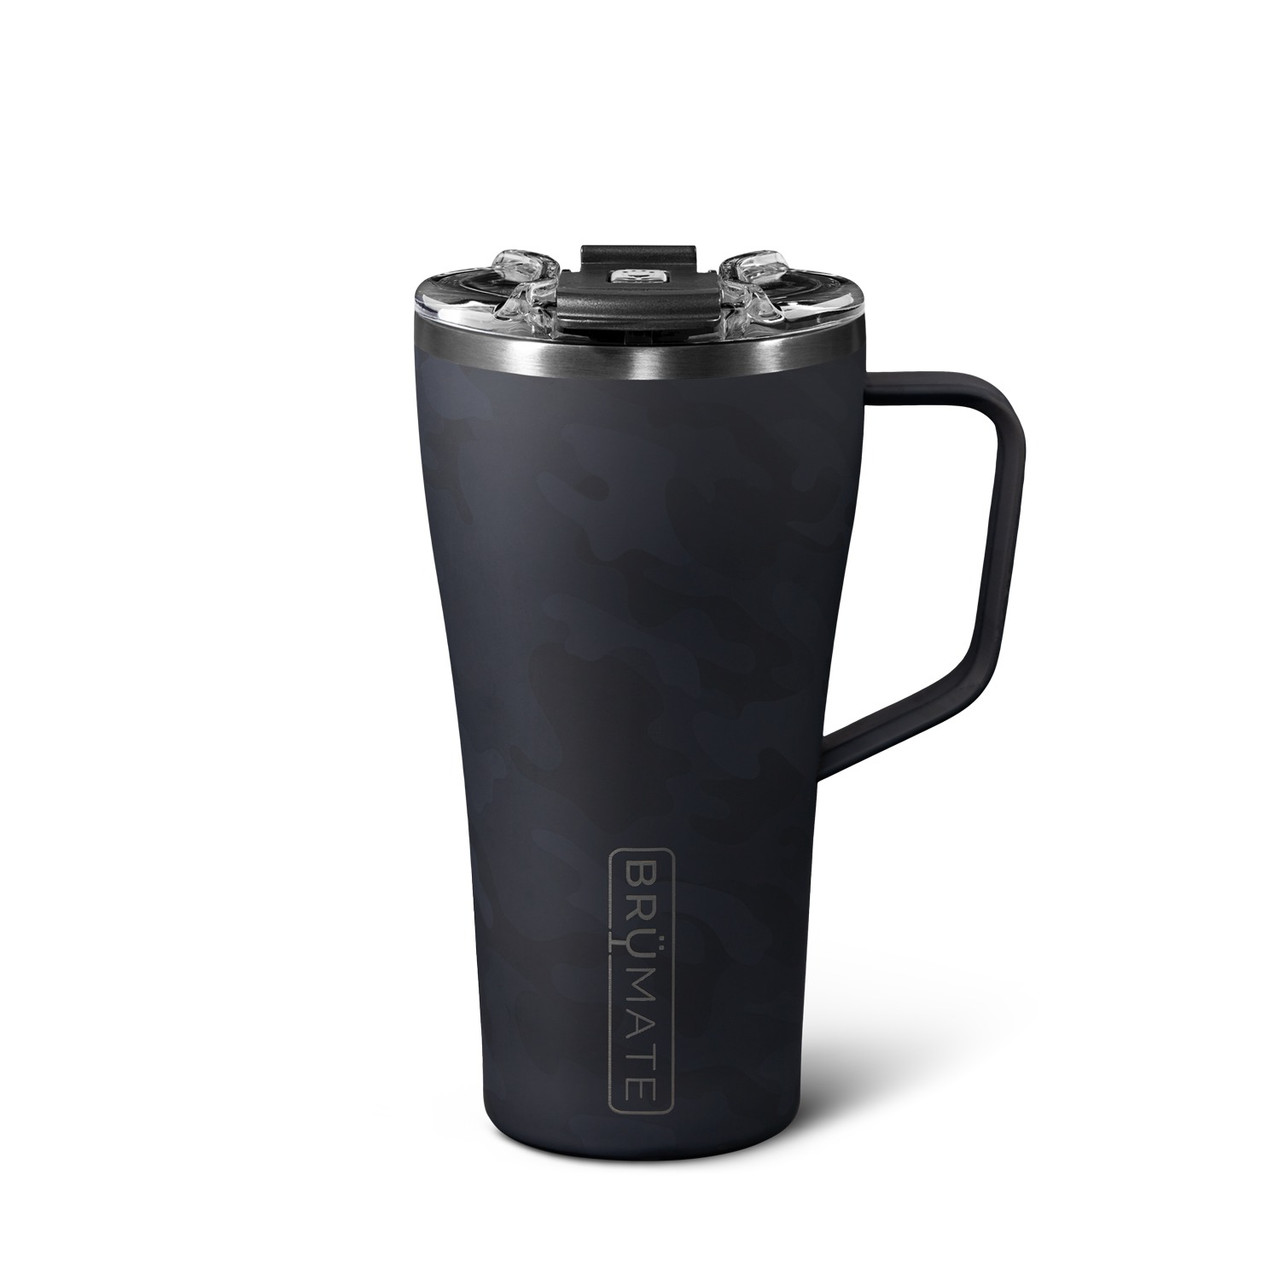 brumate 5 different cups and accessories